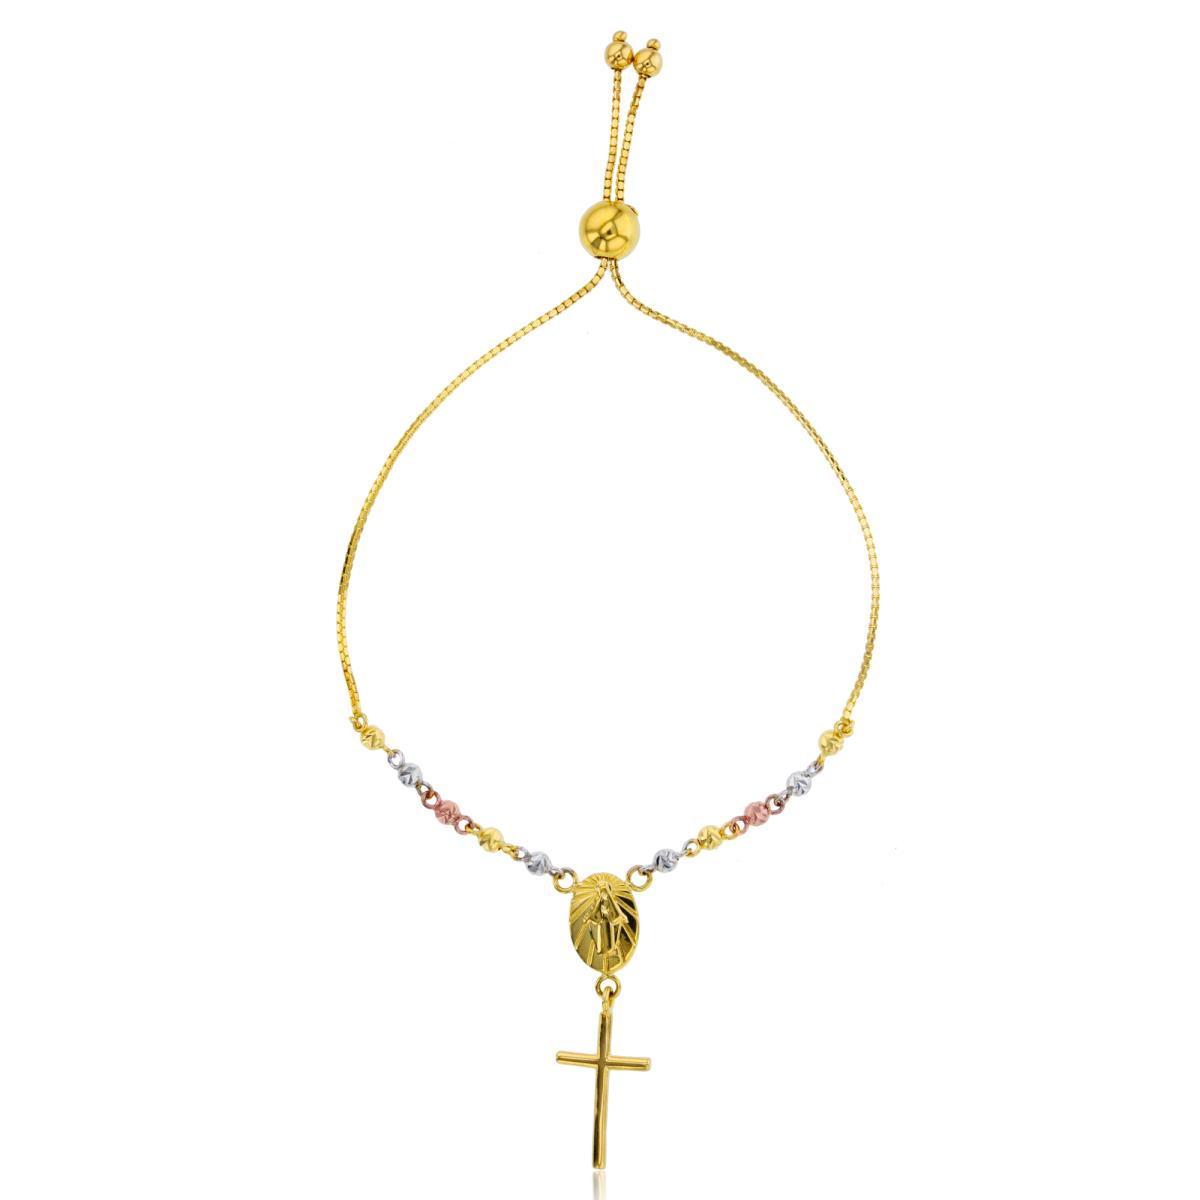 14K Tricolor Gold DC Beads with Vergin Mary & Cross Charms Adjustable 9"Bolo Bracelet